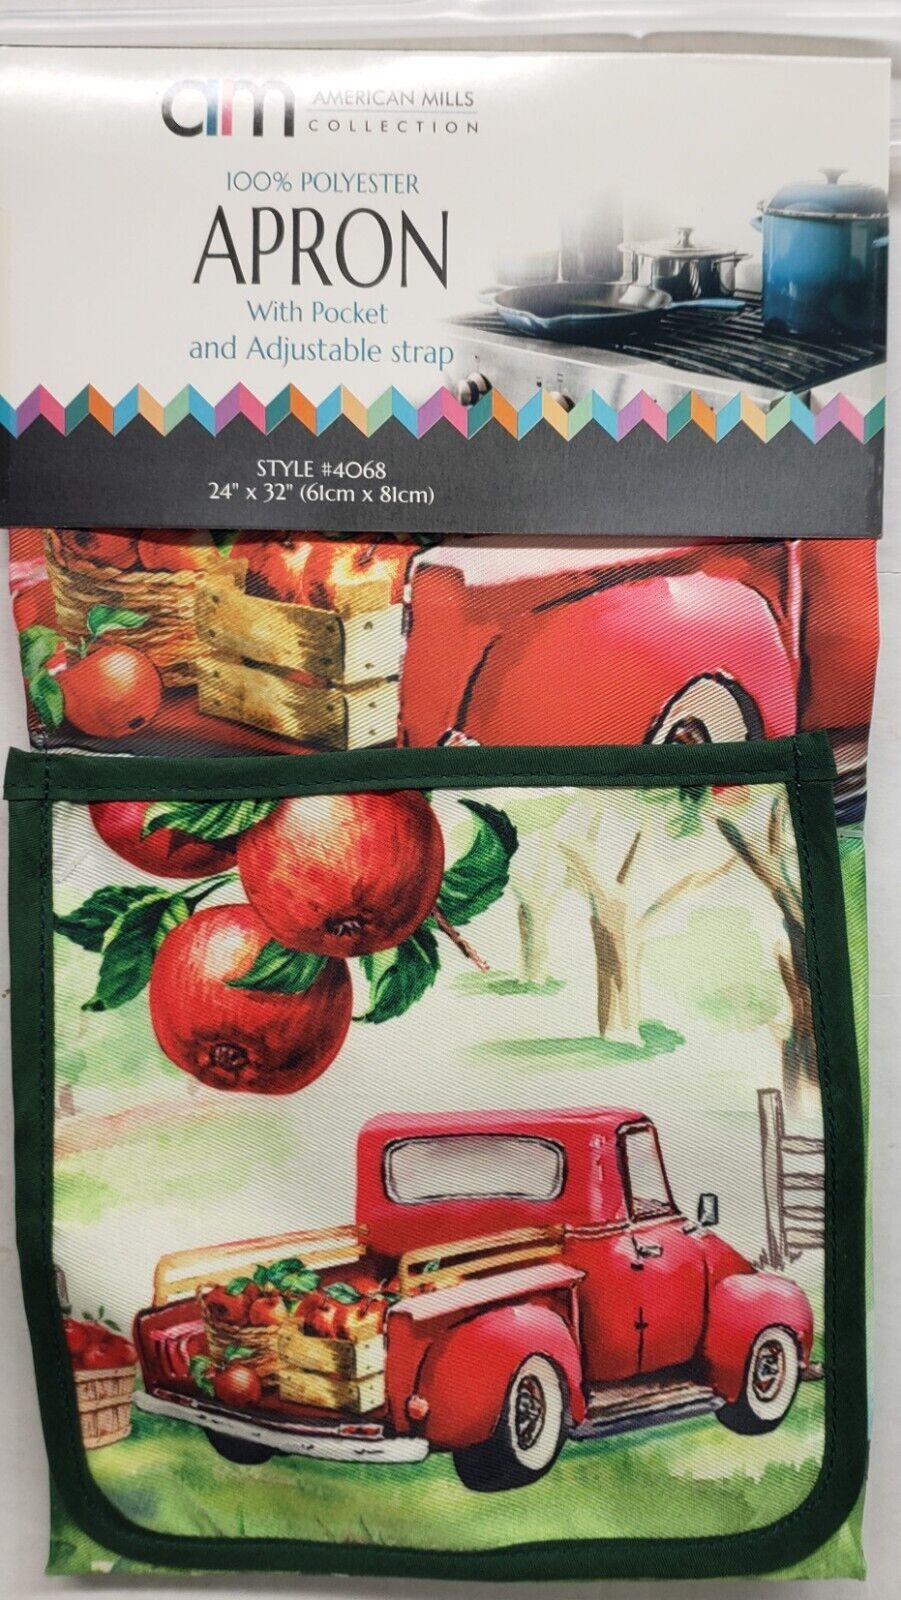 Primary image for Fabric Printed Kitchen Apron with Pocket, 24"x32", RED TRUCK WITH APPLES, AM